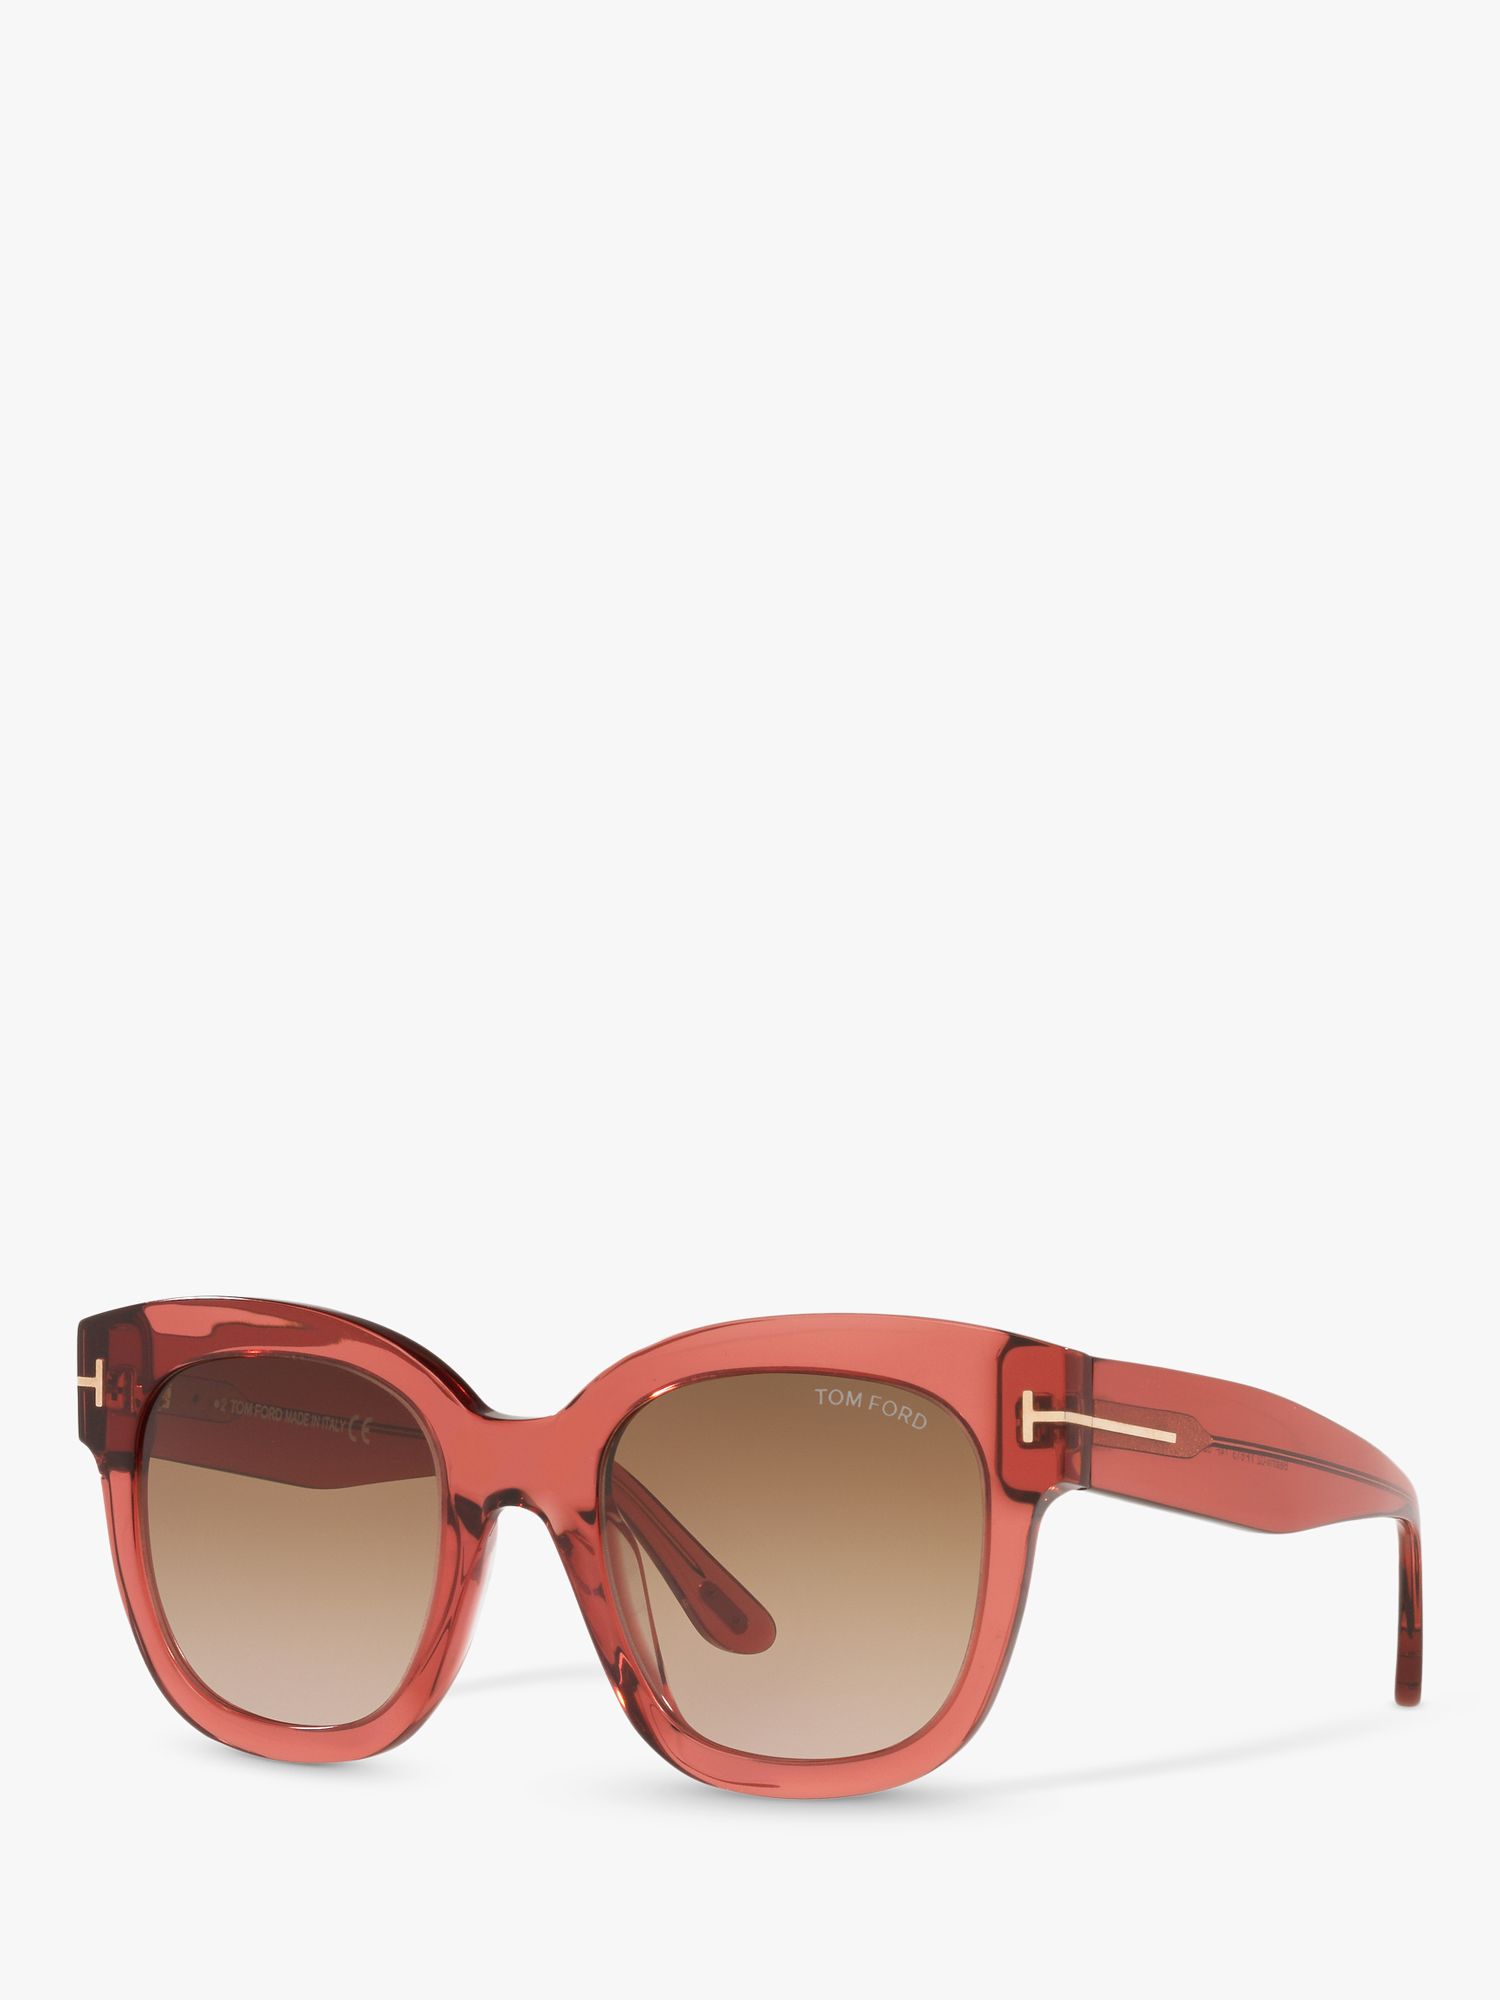 TOM FORD 0TR001298 Women's Square Sunglasses, Pink Shiny at John Lewis &  Partners